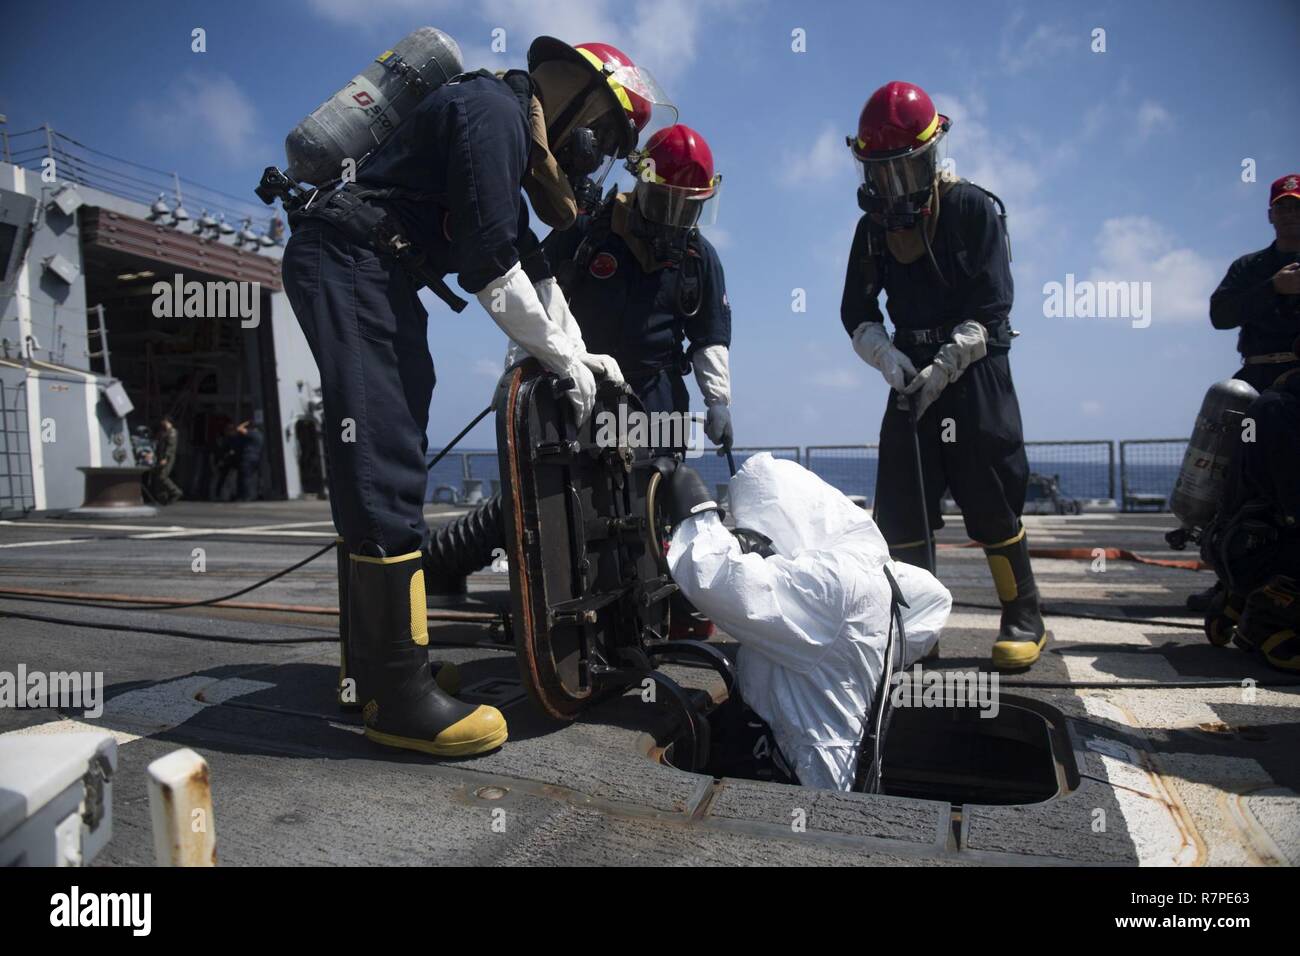 SOUTH CHINA SEA (March 20, 2017) Hull Maintenance Technician Fireman Adam Welkovich, from Stamford, Connecticut, climbs down a scuttle on the flight deck during a toxic gas drill aboard Arleigh Burke-class guided-missile destroyer USS Michael Murphy (DDG 112). Michael Murphy is on a regularly scheduled Western Pacific deployment with the Carl Vinson Carrier Strike Group as part of the U.S. Pacific Fleet-led initiative to extend the command and control functions of U.S. 3rd Fleet. U.S. Navy aircraft carrier strike groups have patrolled the Indo-Asia-Pacific regularly and routinely for more than Stock Photo